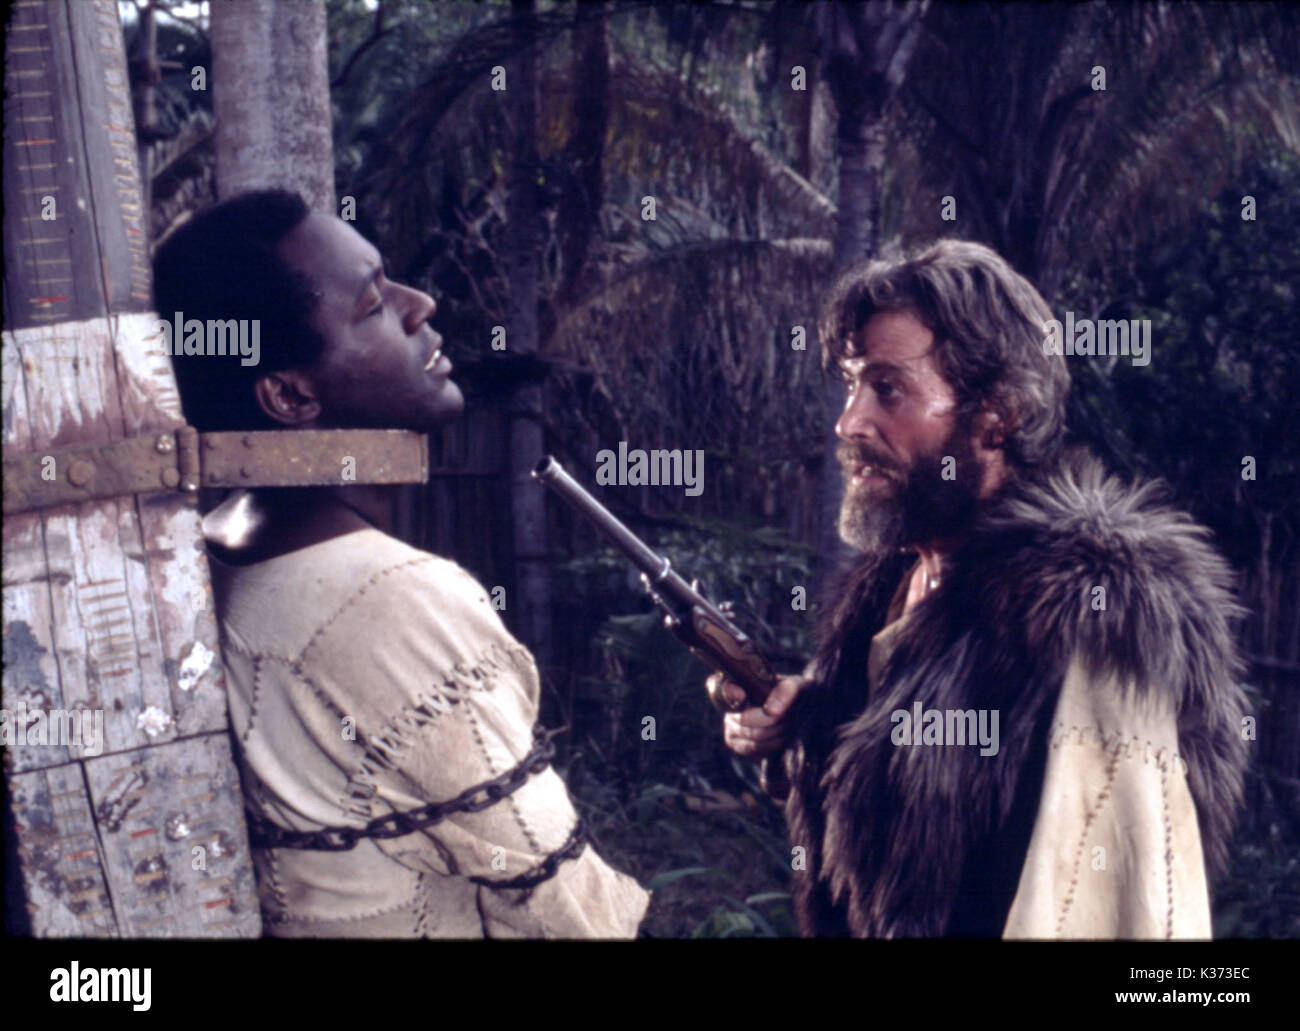 Homme vendredi (BR/US 1975) RICHARD ROUNDTREE, Peter O'TOOLE Date : 1975 Banque D'Images